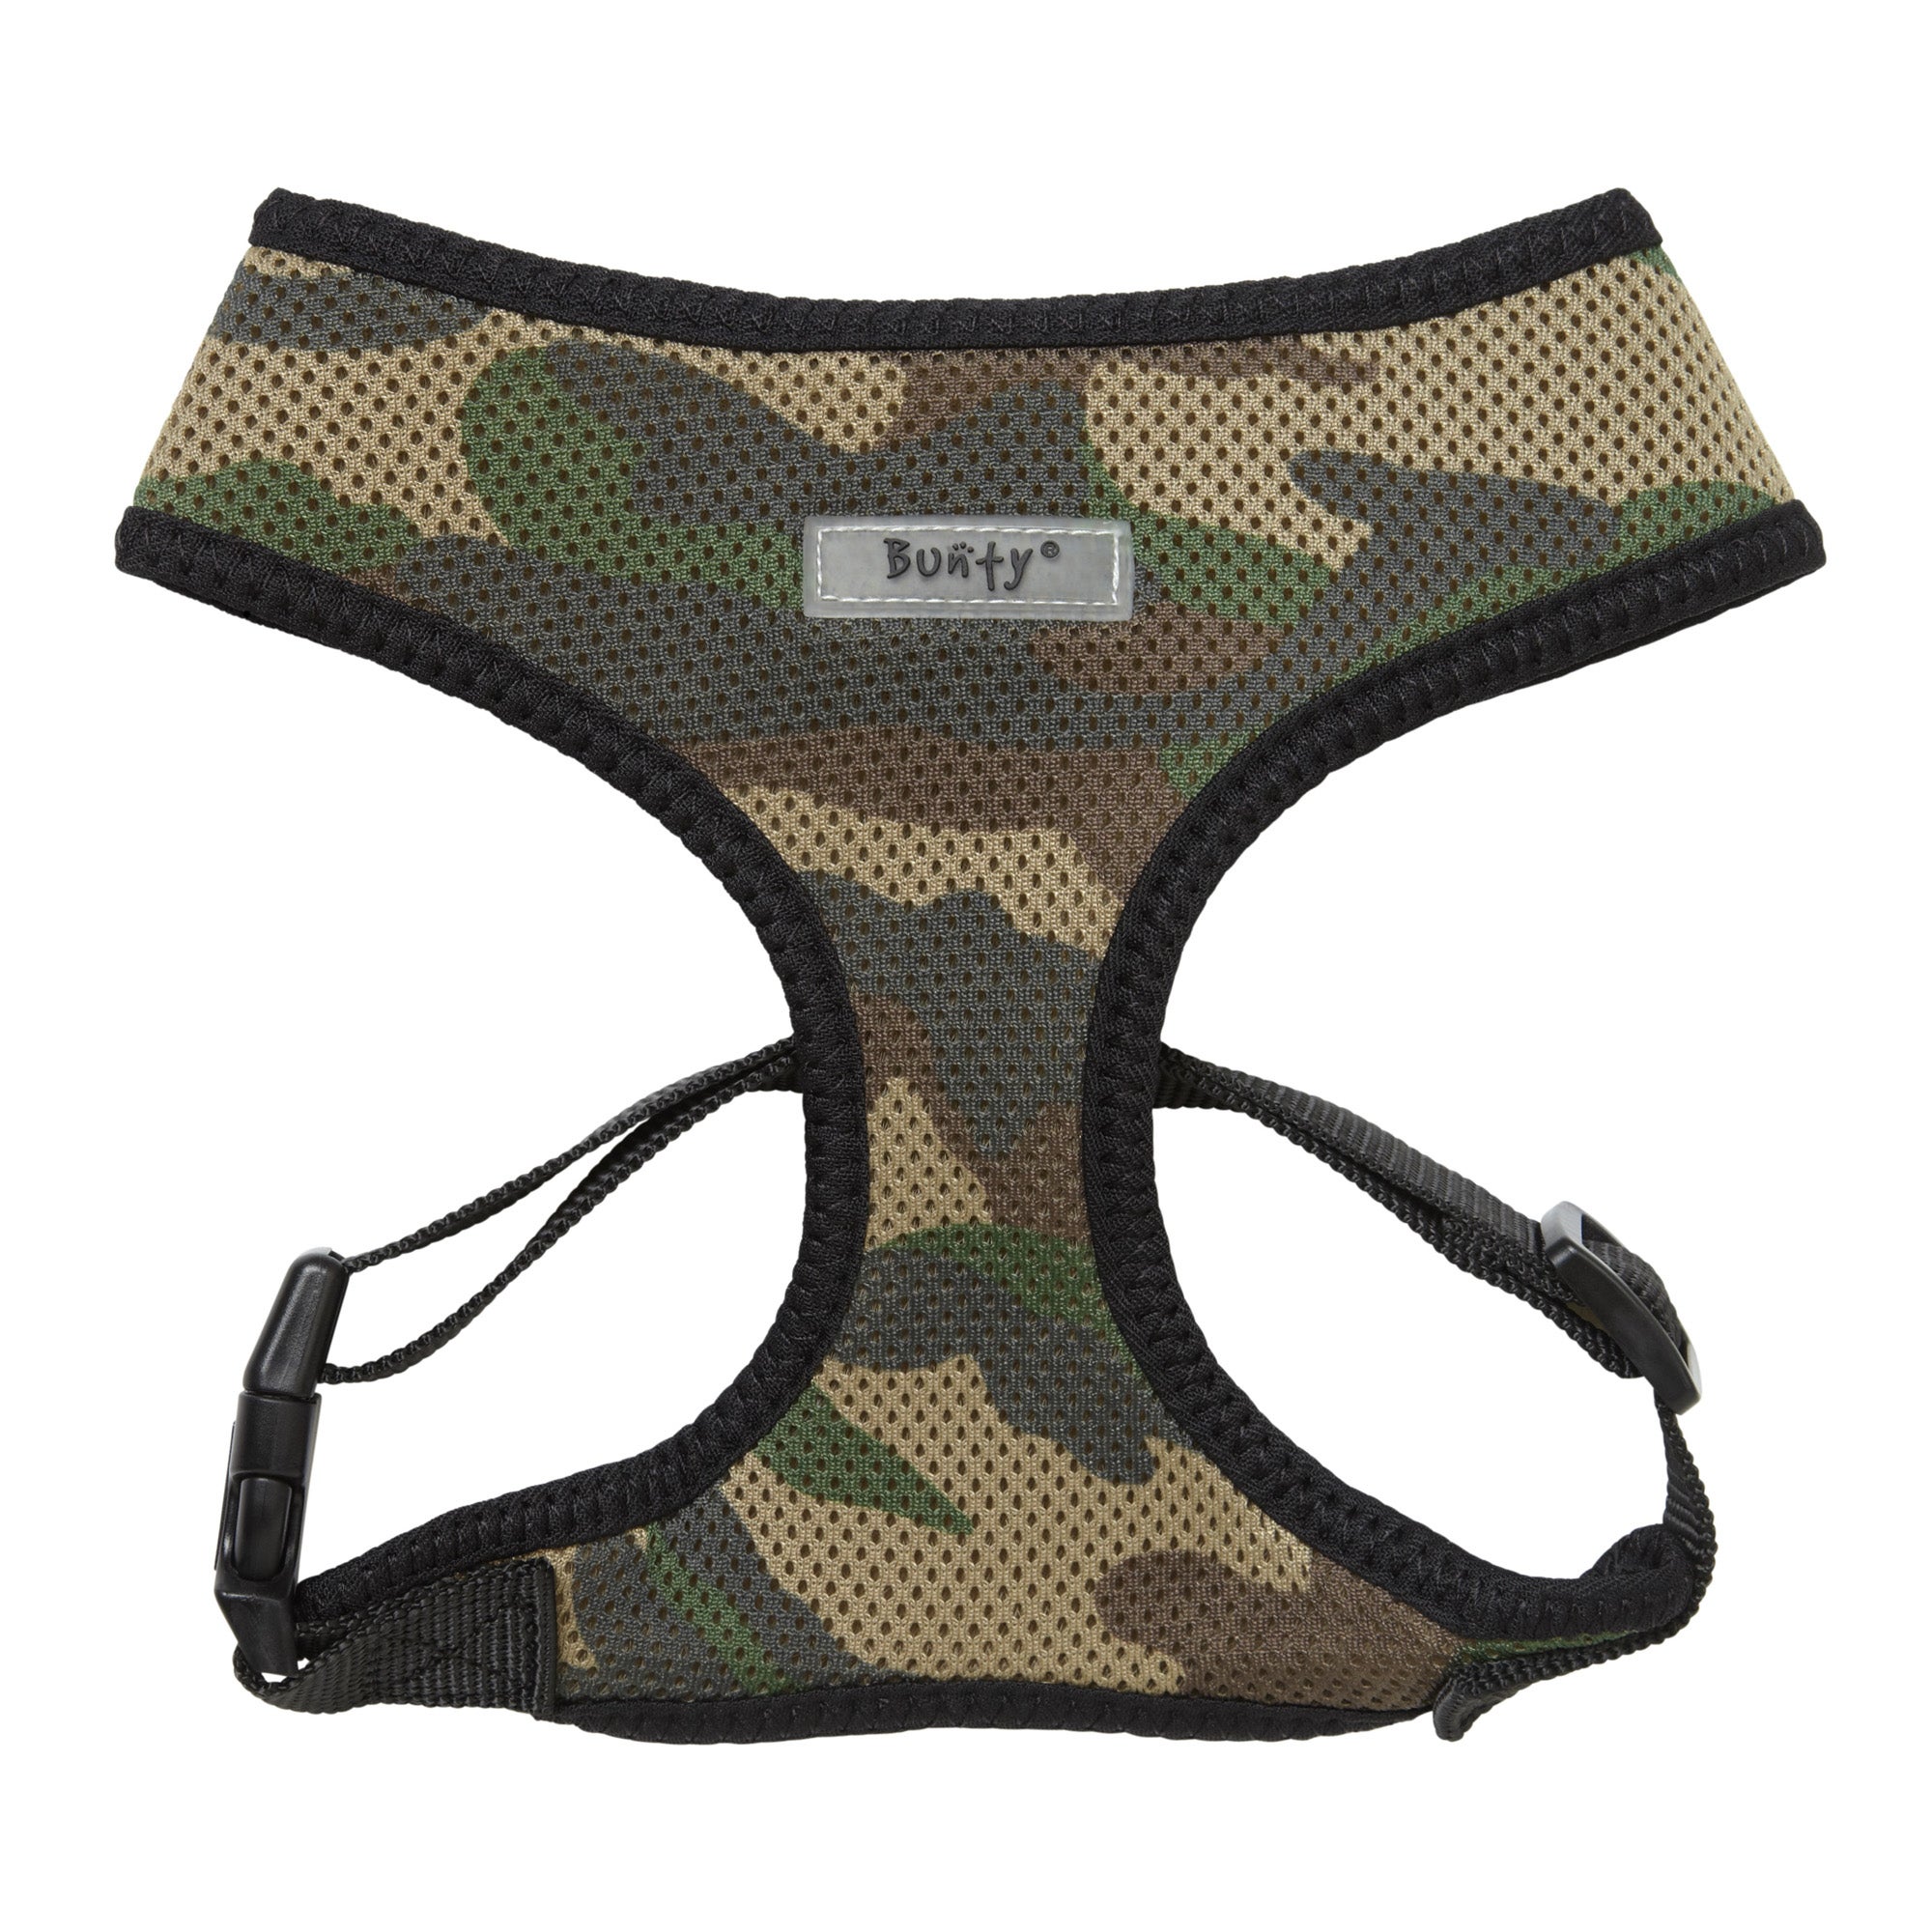 Bunty Camouflage Mesh Dog Harness Green and Brown